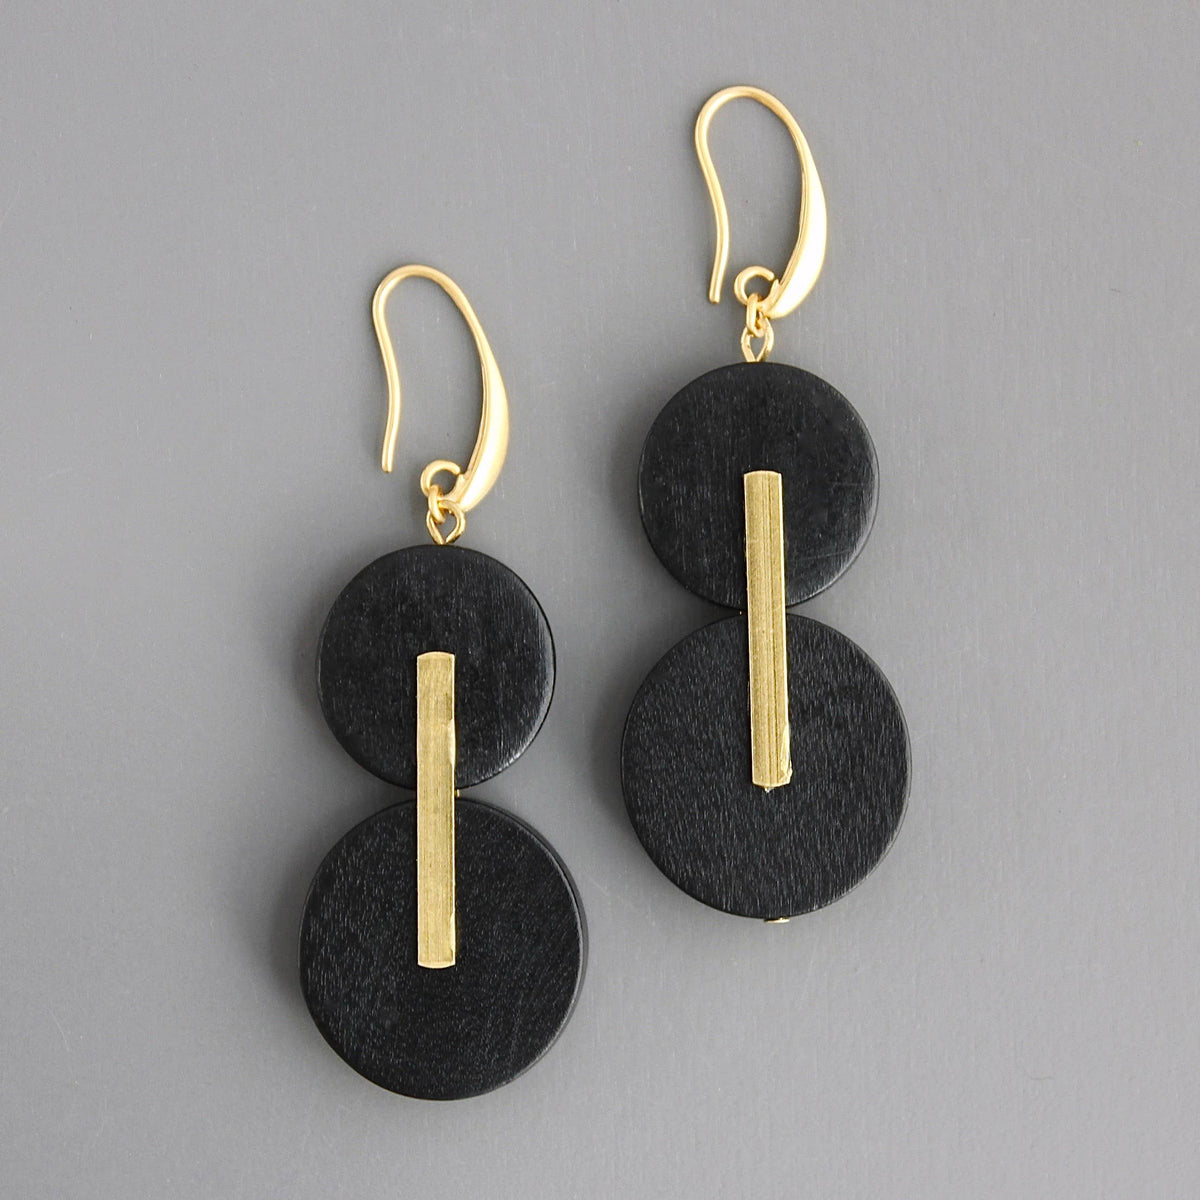 CHRE44 Black wood and brass earrings